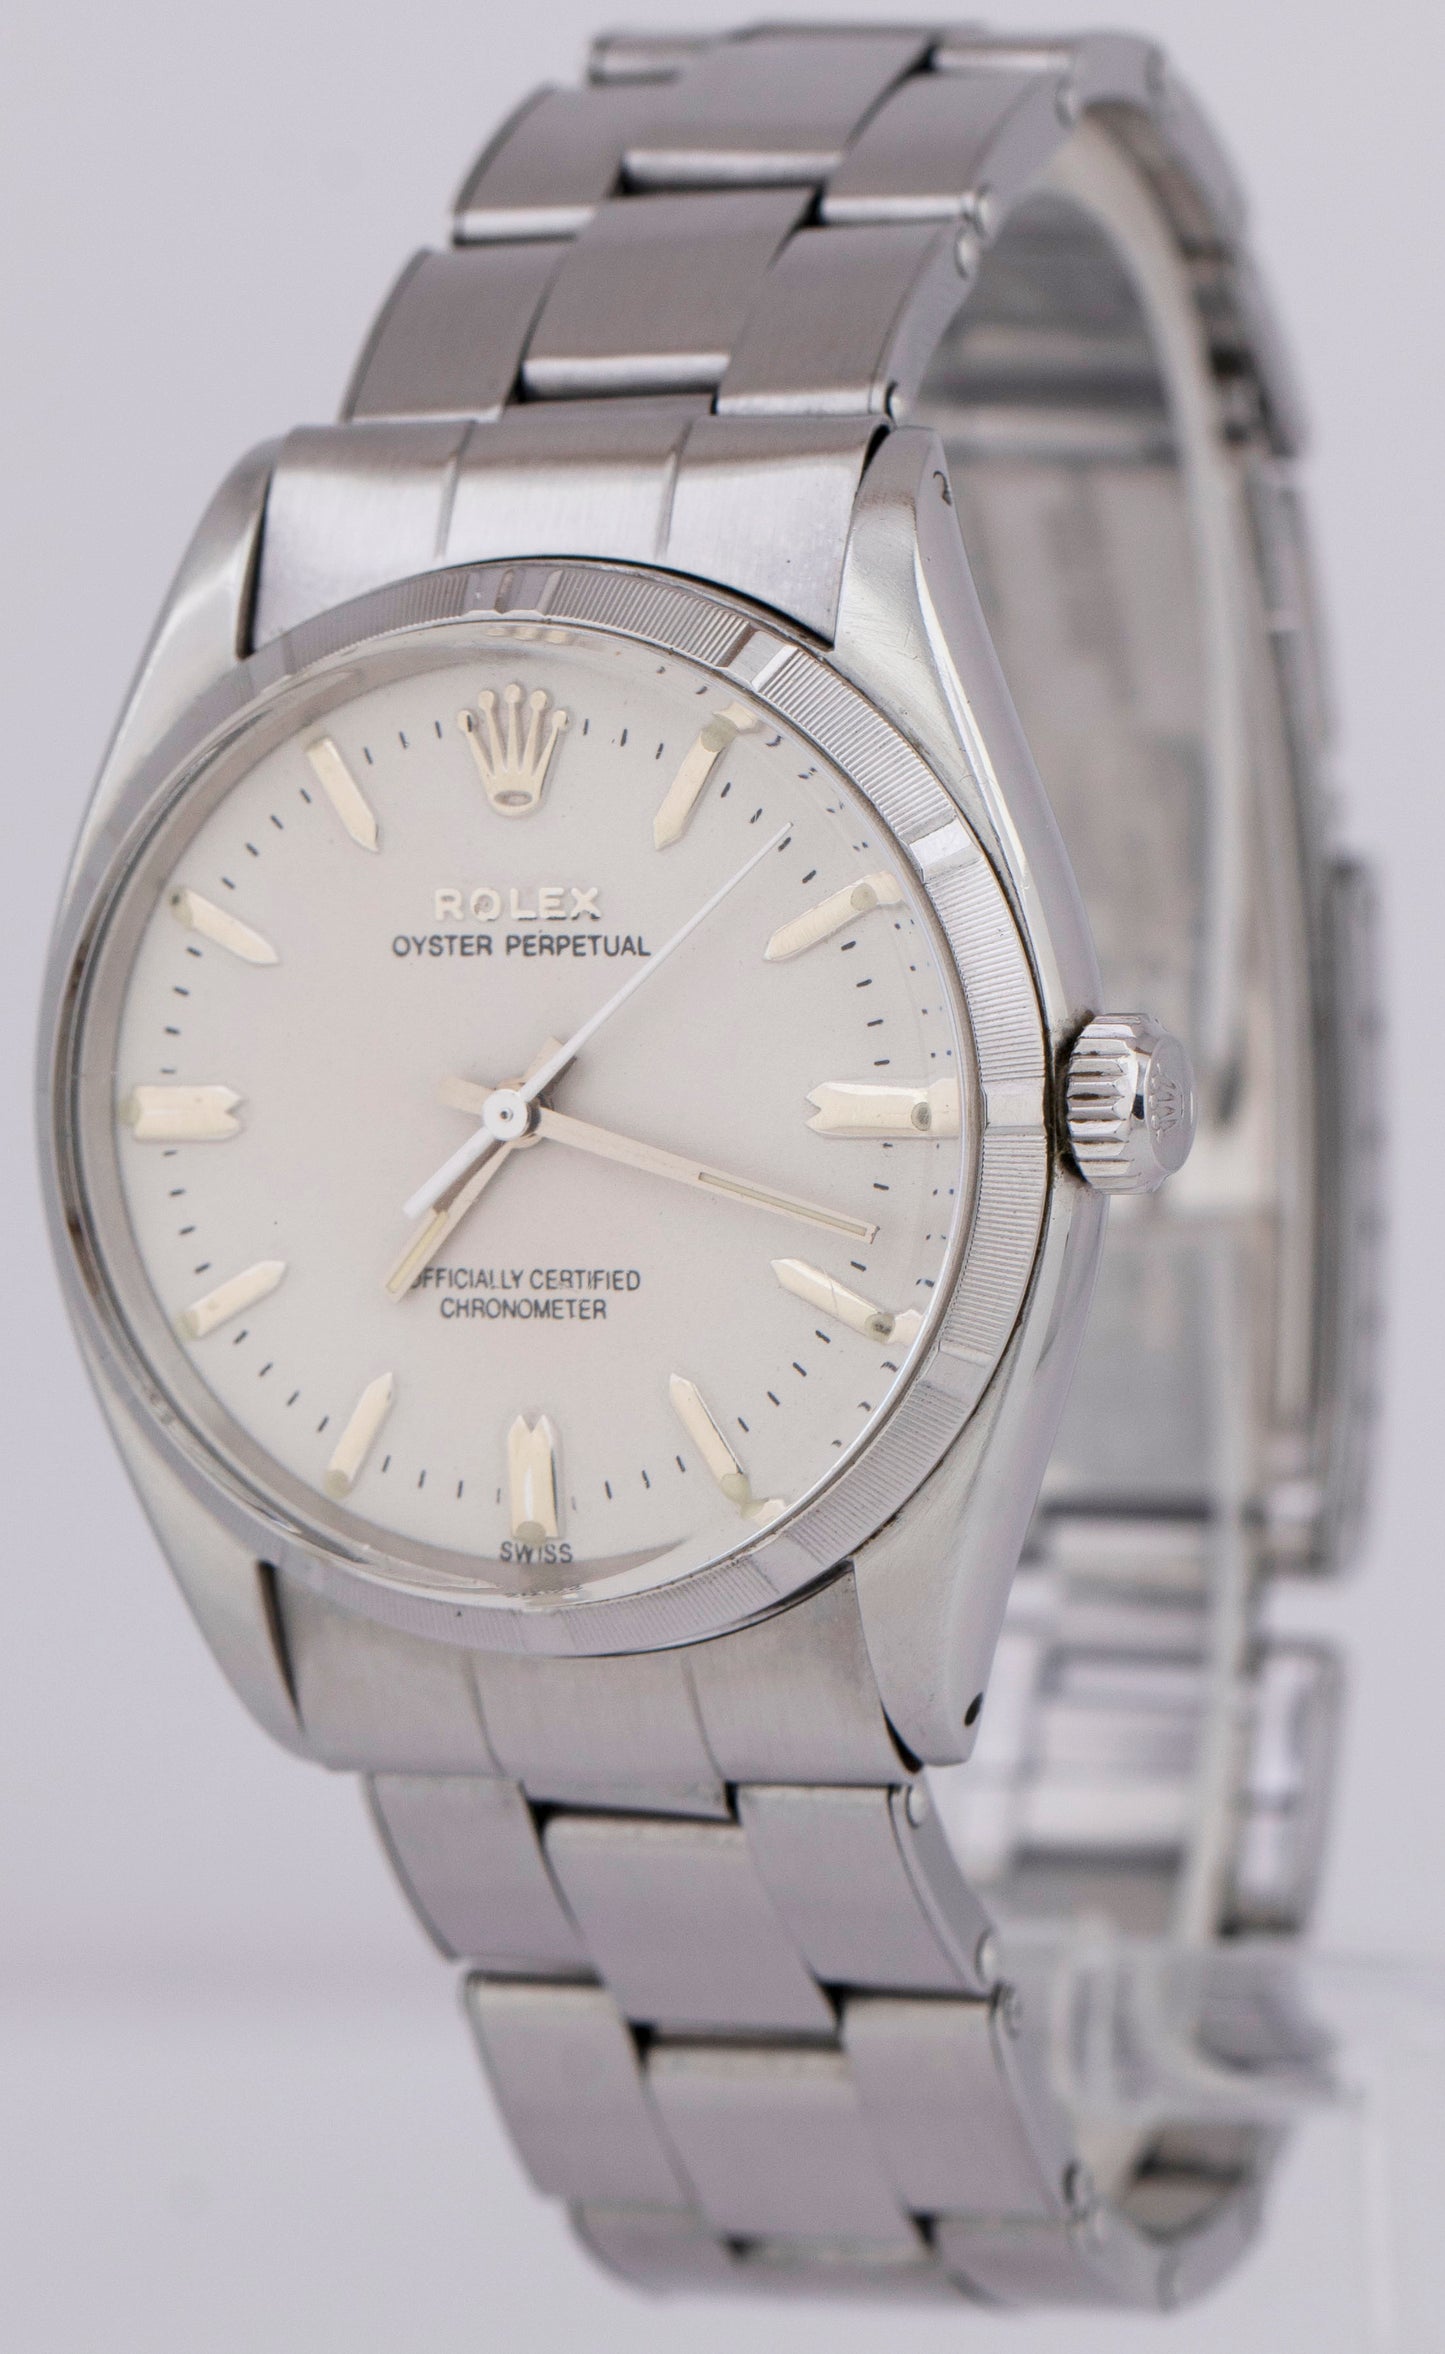 1955 Rolex Oyster Perpetual Stainless Steel 34mm White Engine-Turned Watch 6565